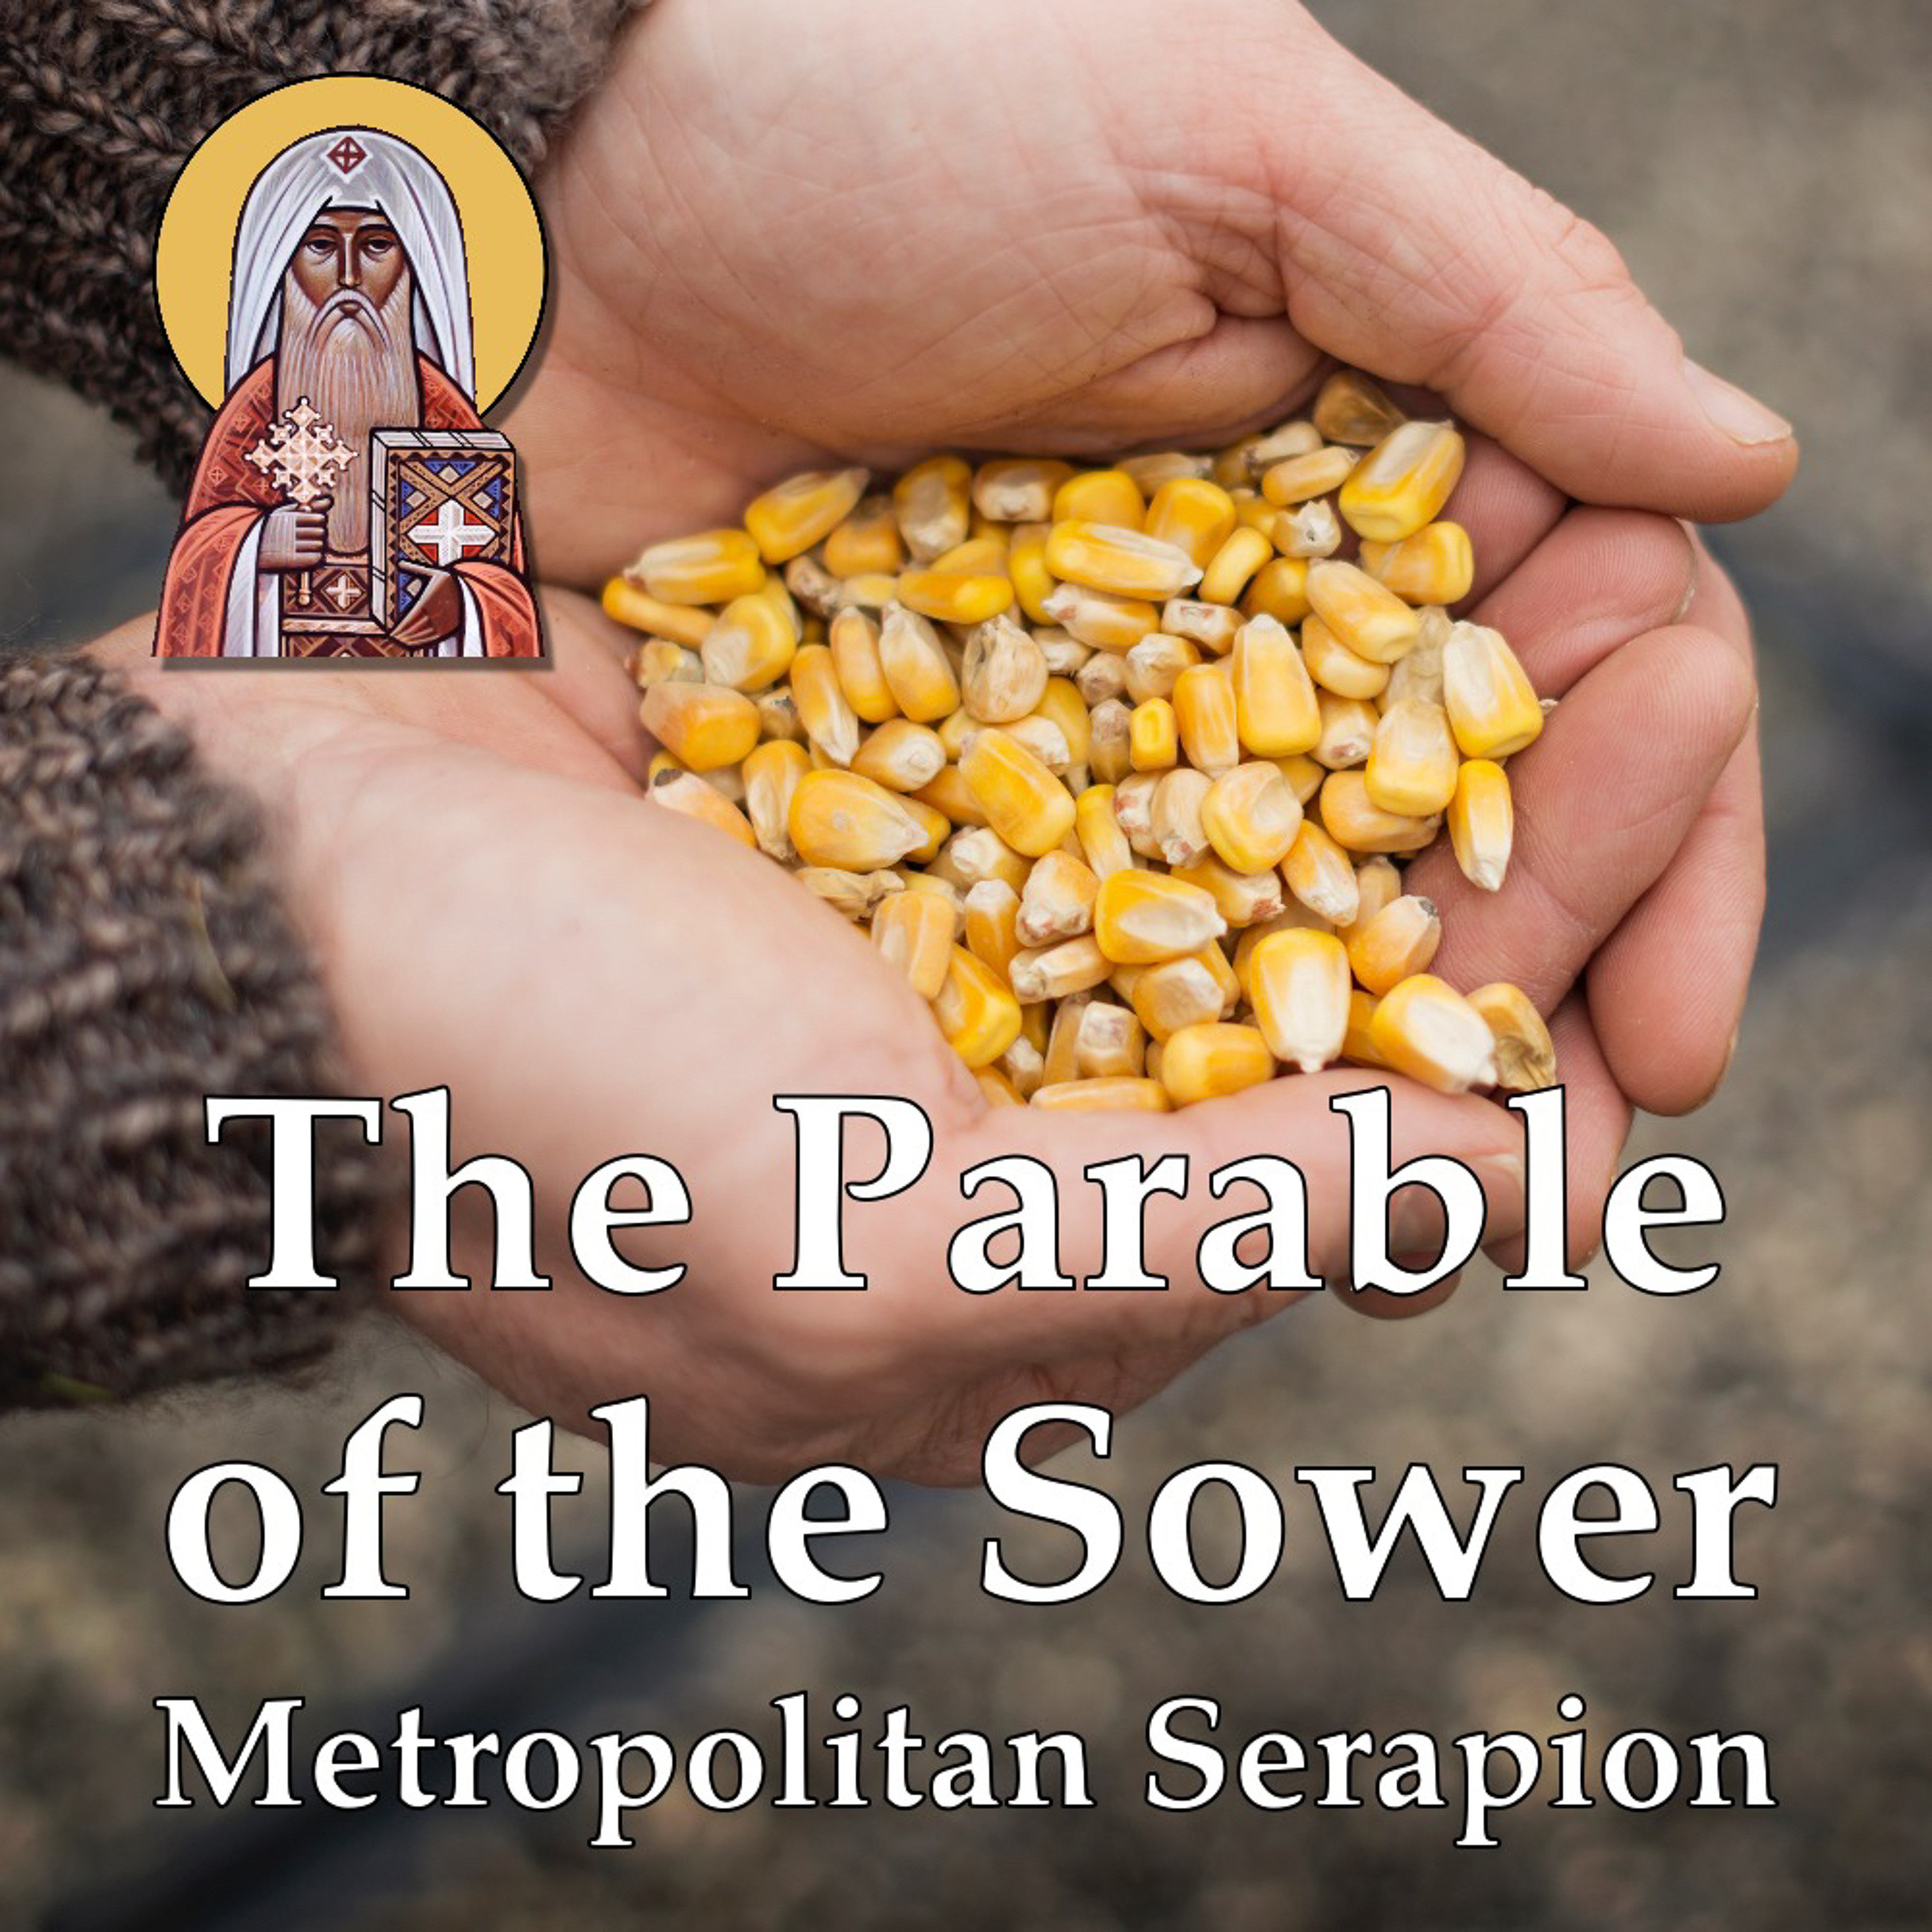 The Parable of the Sower (Metropolitan Serapion)